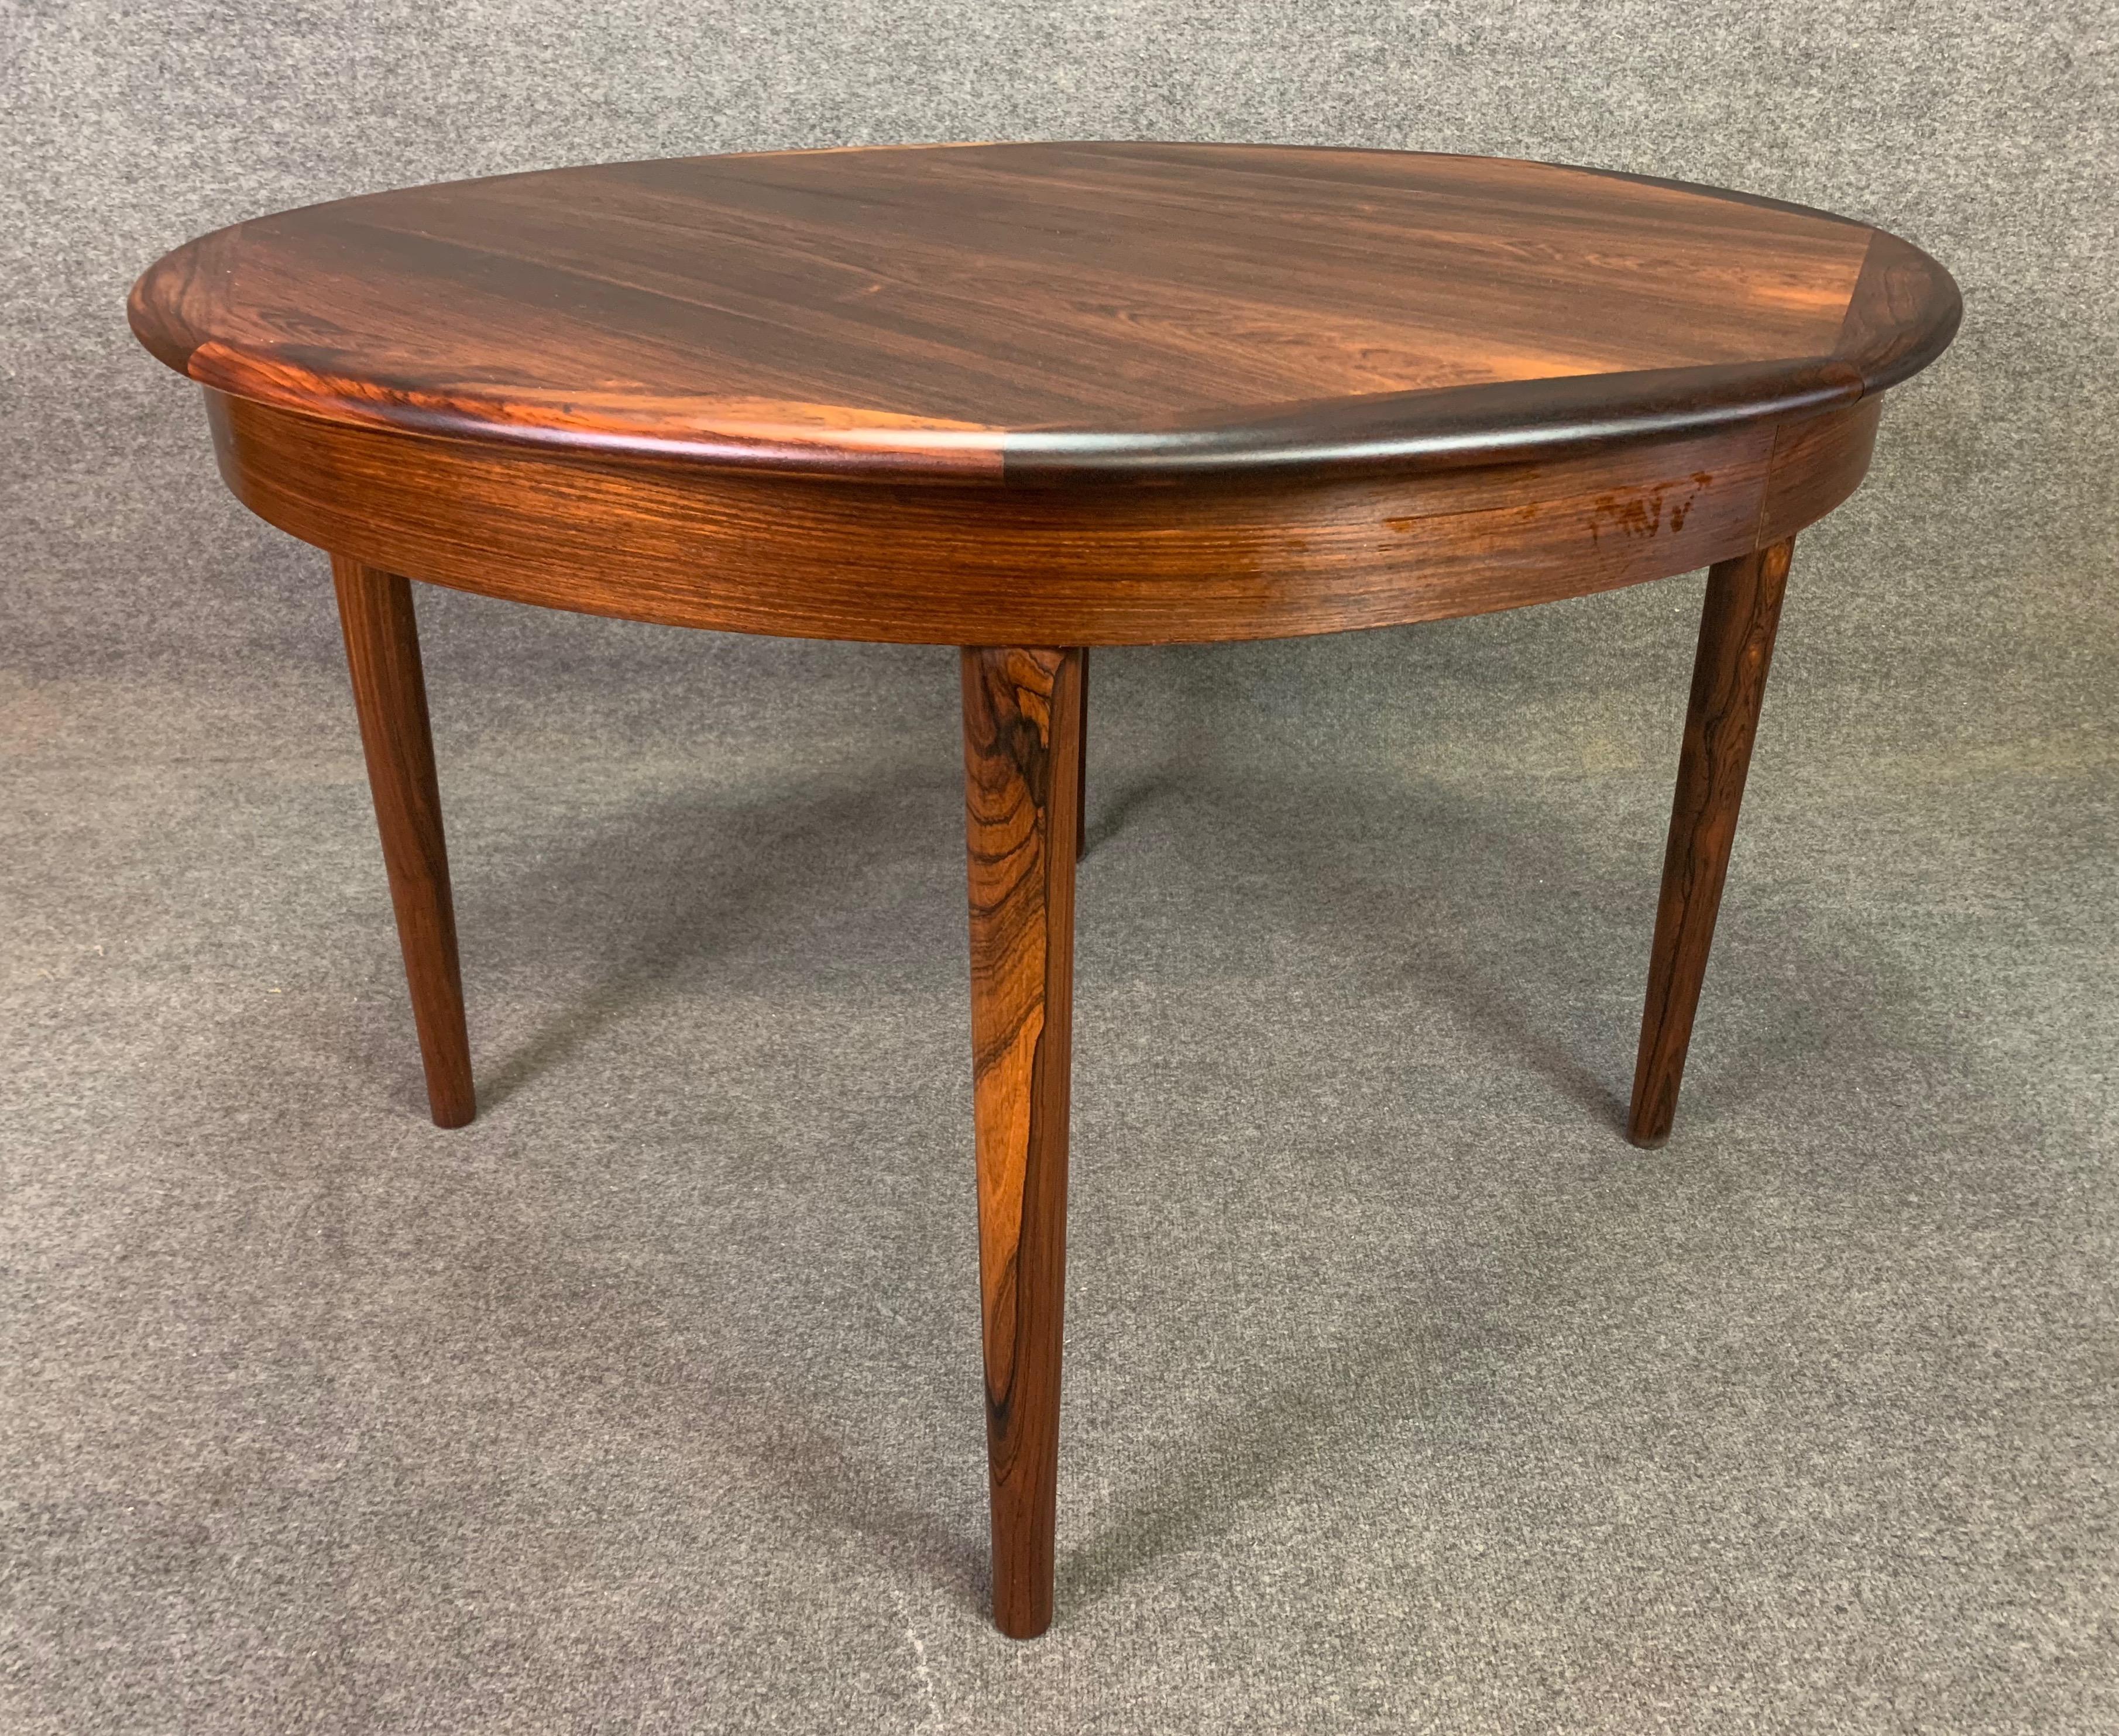 Here is a beautiful 1960s Scandinavian Modern dining table in rosewood recently imported from Denmark to California before its refinishing.
This exquisite dining table features a vibrant rosewood grain, three leaves and four solid wood tapered